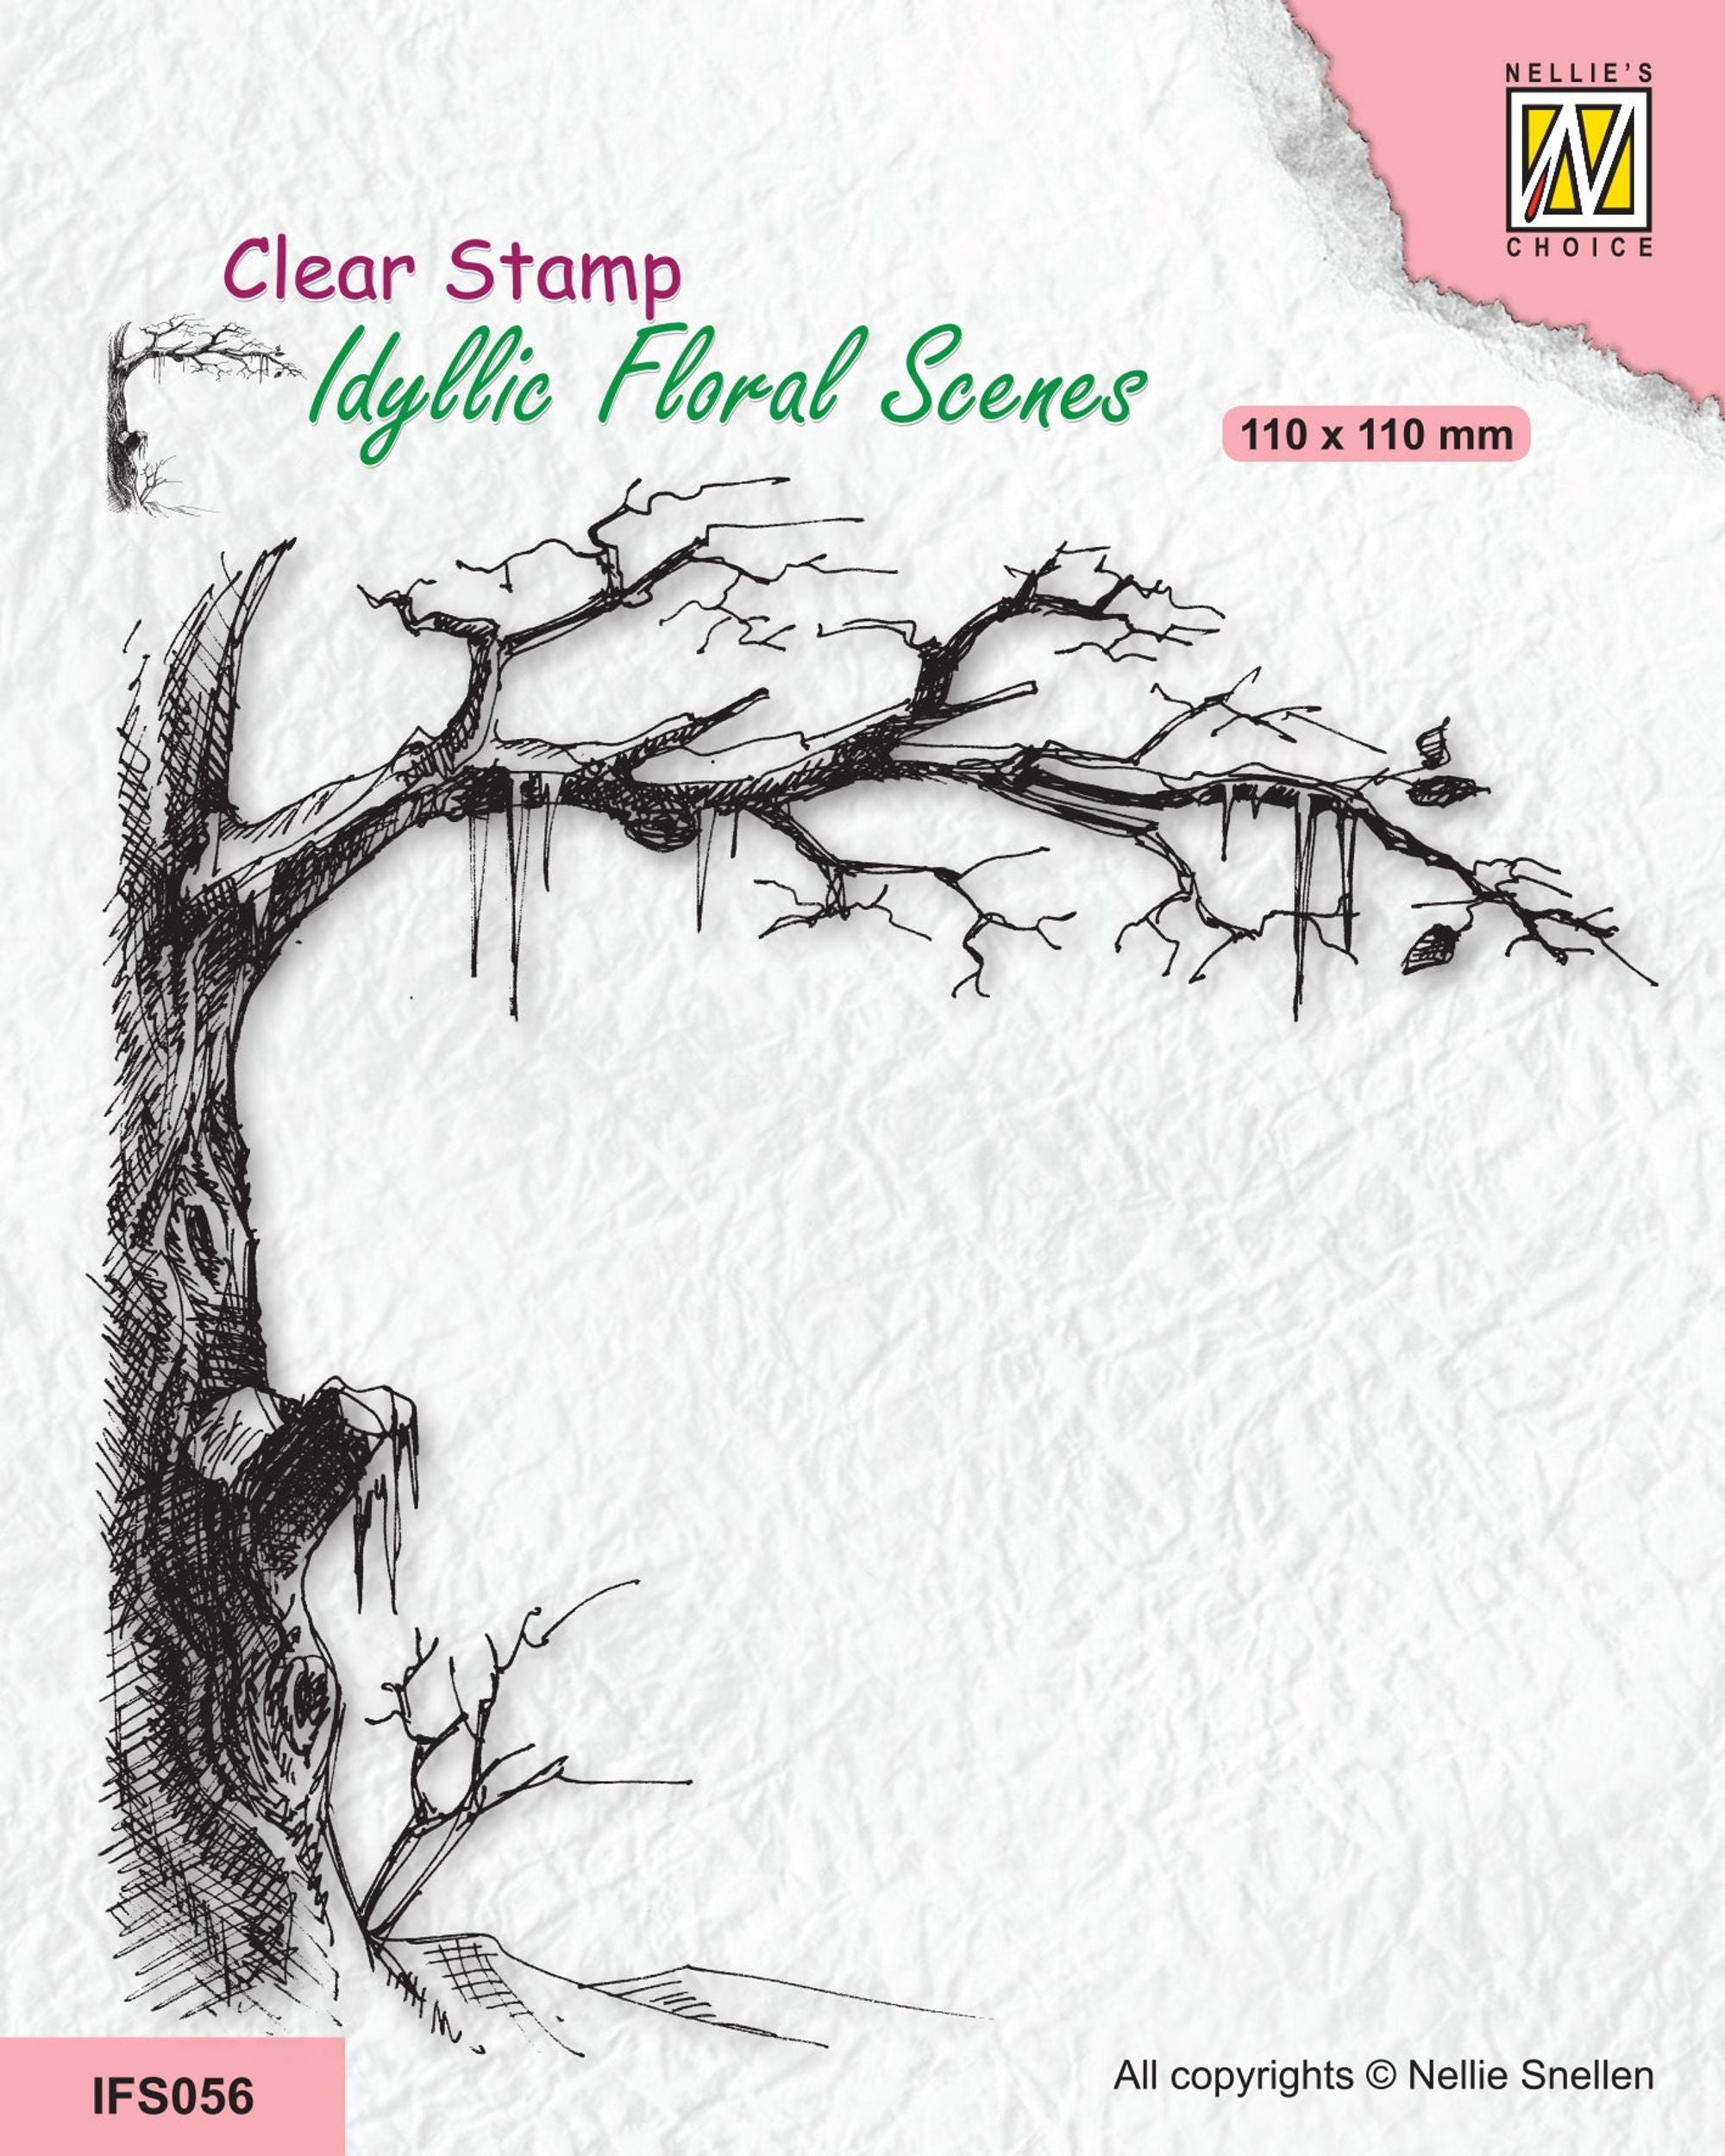 Nellie's Choice Clear Stamp Idyllic Floral Scene - Icy Tree